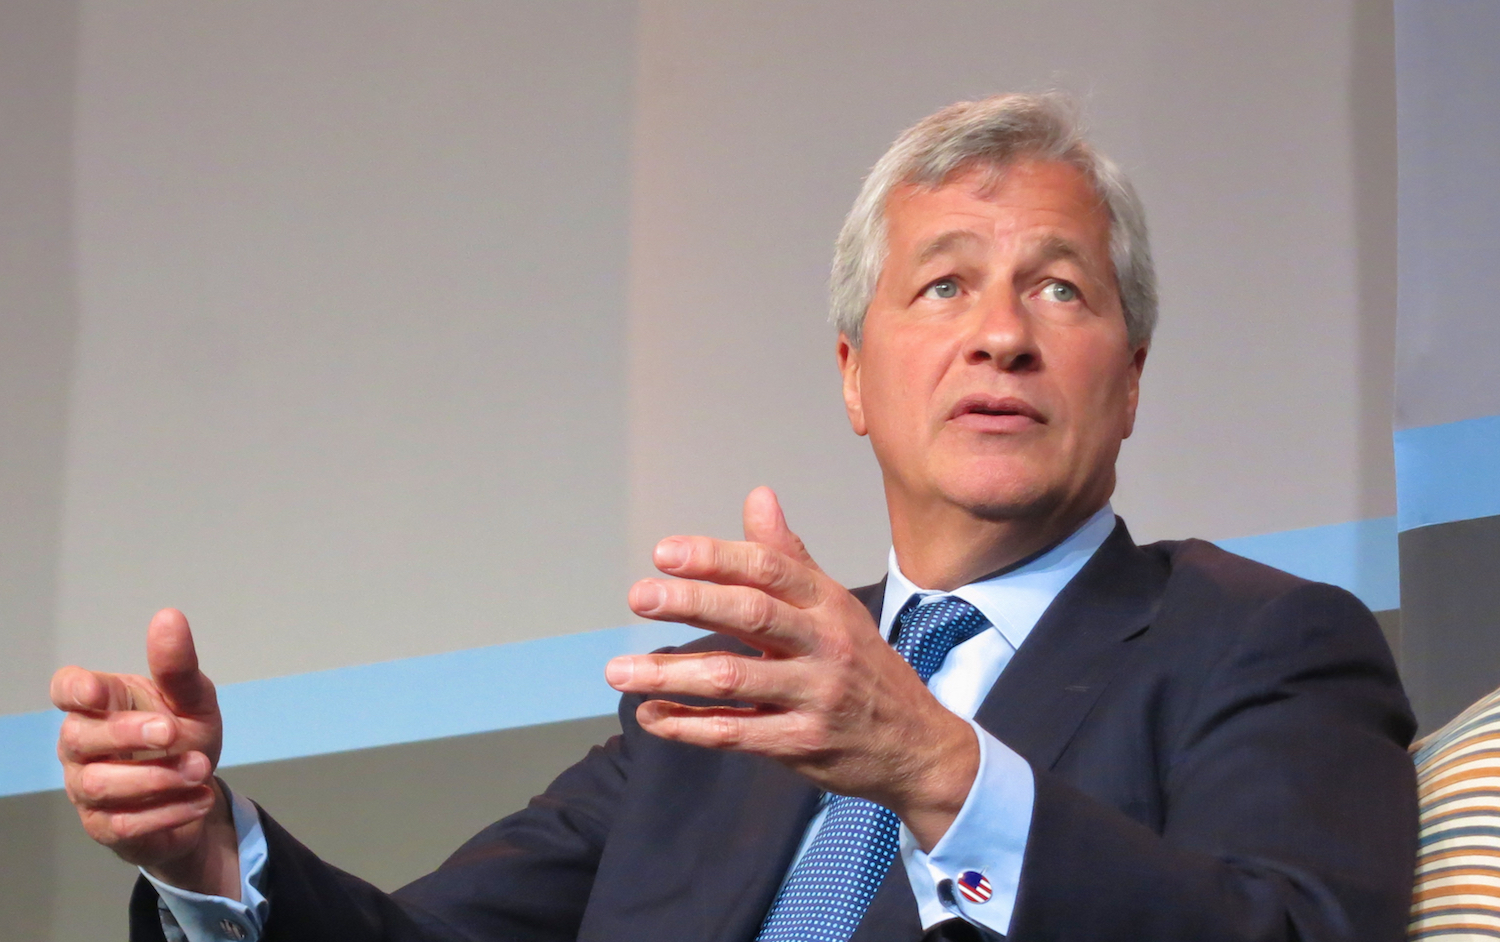 JPMorgan CEO Dimon Says Crypto Companies ‘Want To Eat Our Lunch’